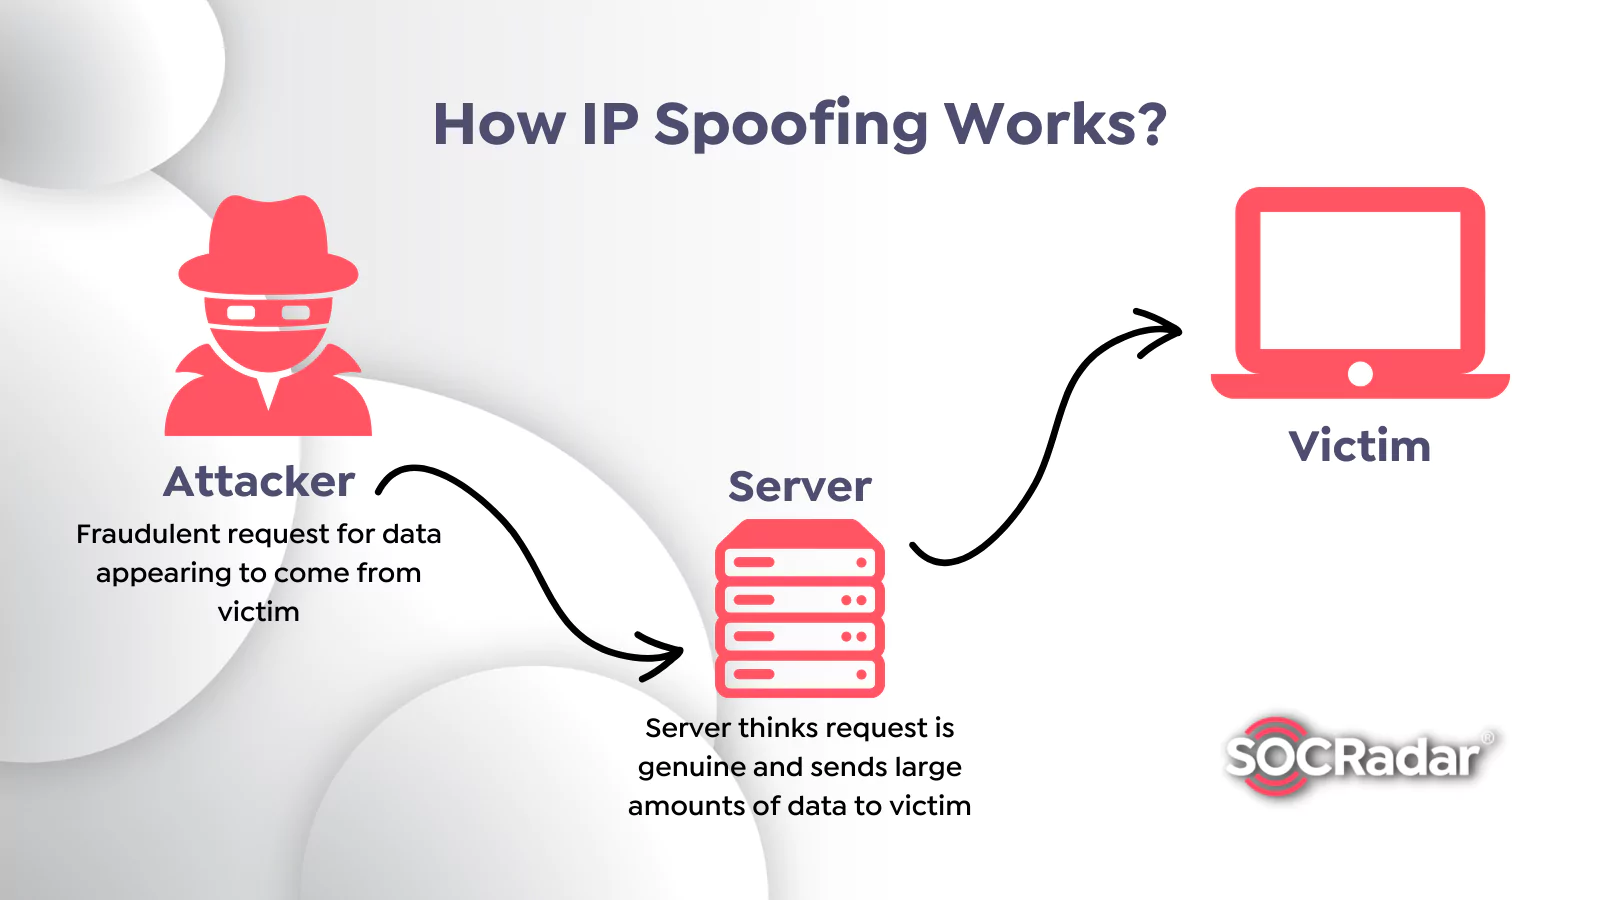 SOCRadar® Cyber Intelligence Inc. | What is Spoofing Attack and How to Prevent It?